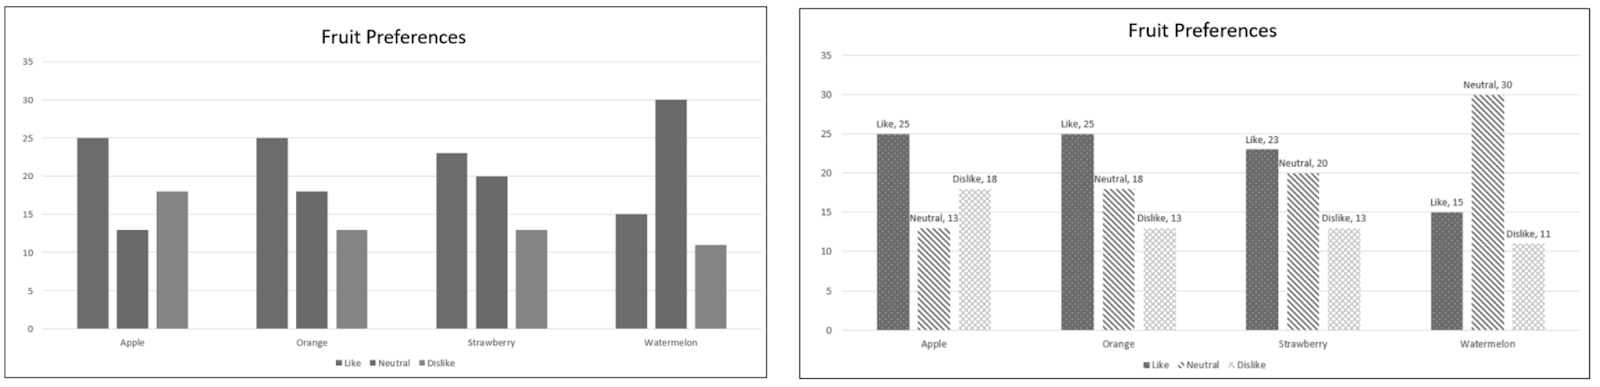 The two bar charts described above, pictured side-by-side. The colors have been converted to greyscale to make the comparison between the colored bars and patterned bars easier to perceive.